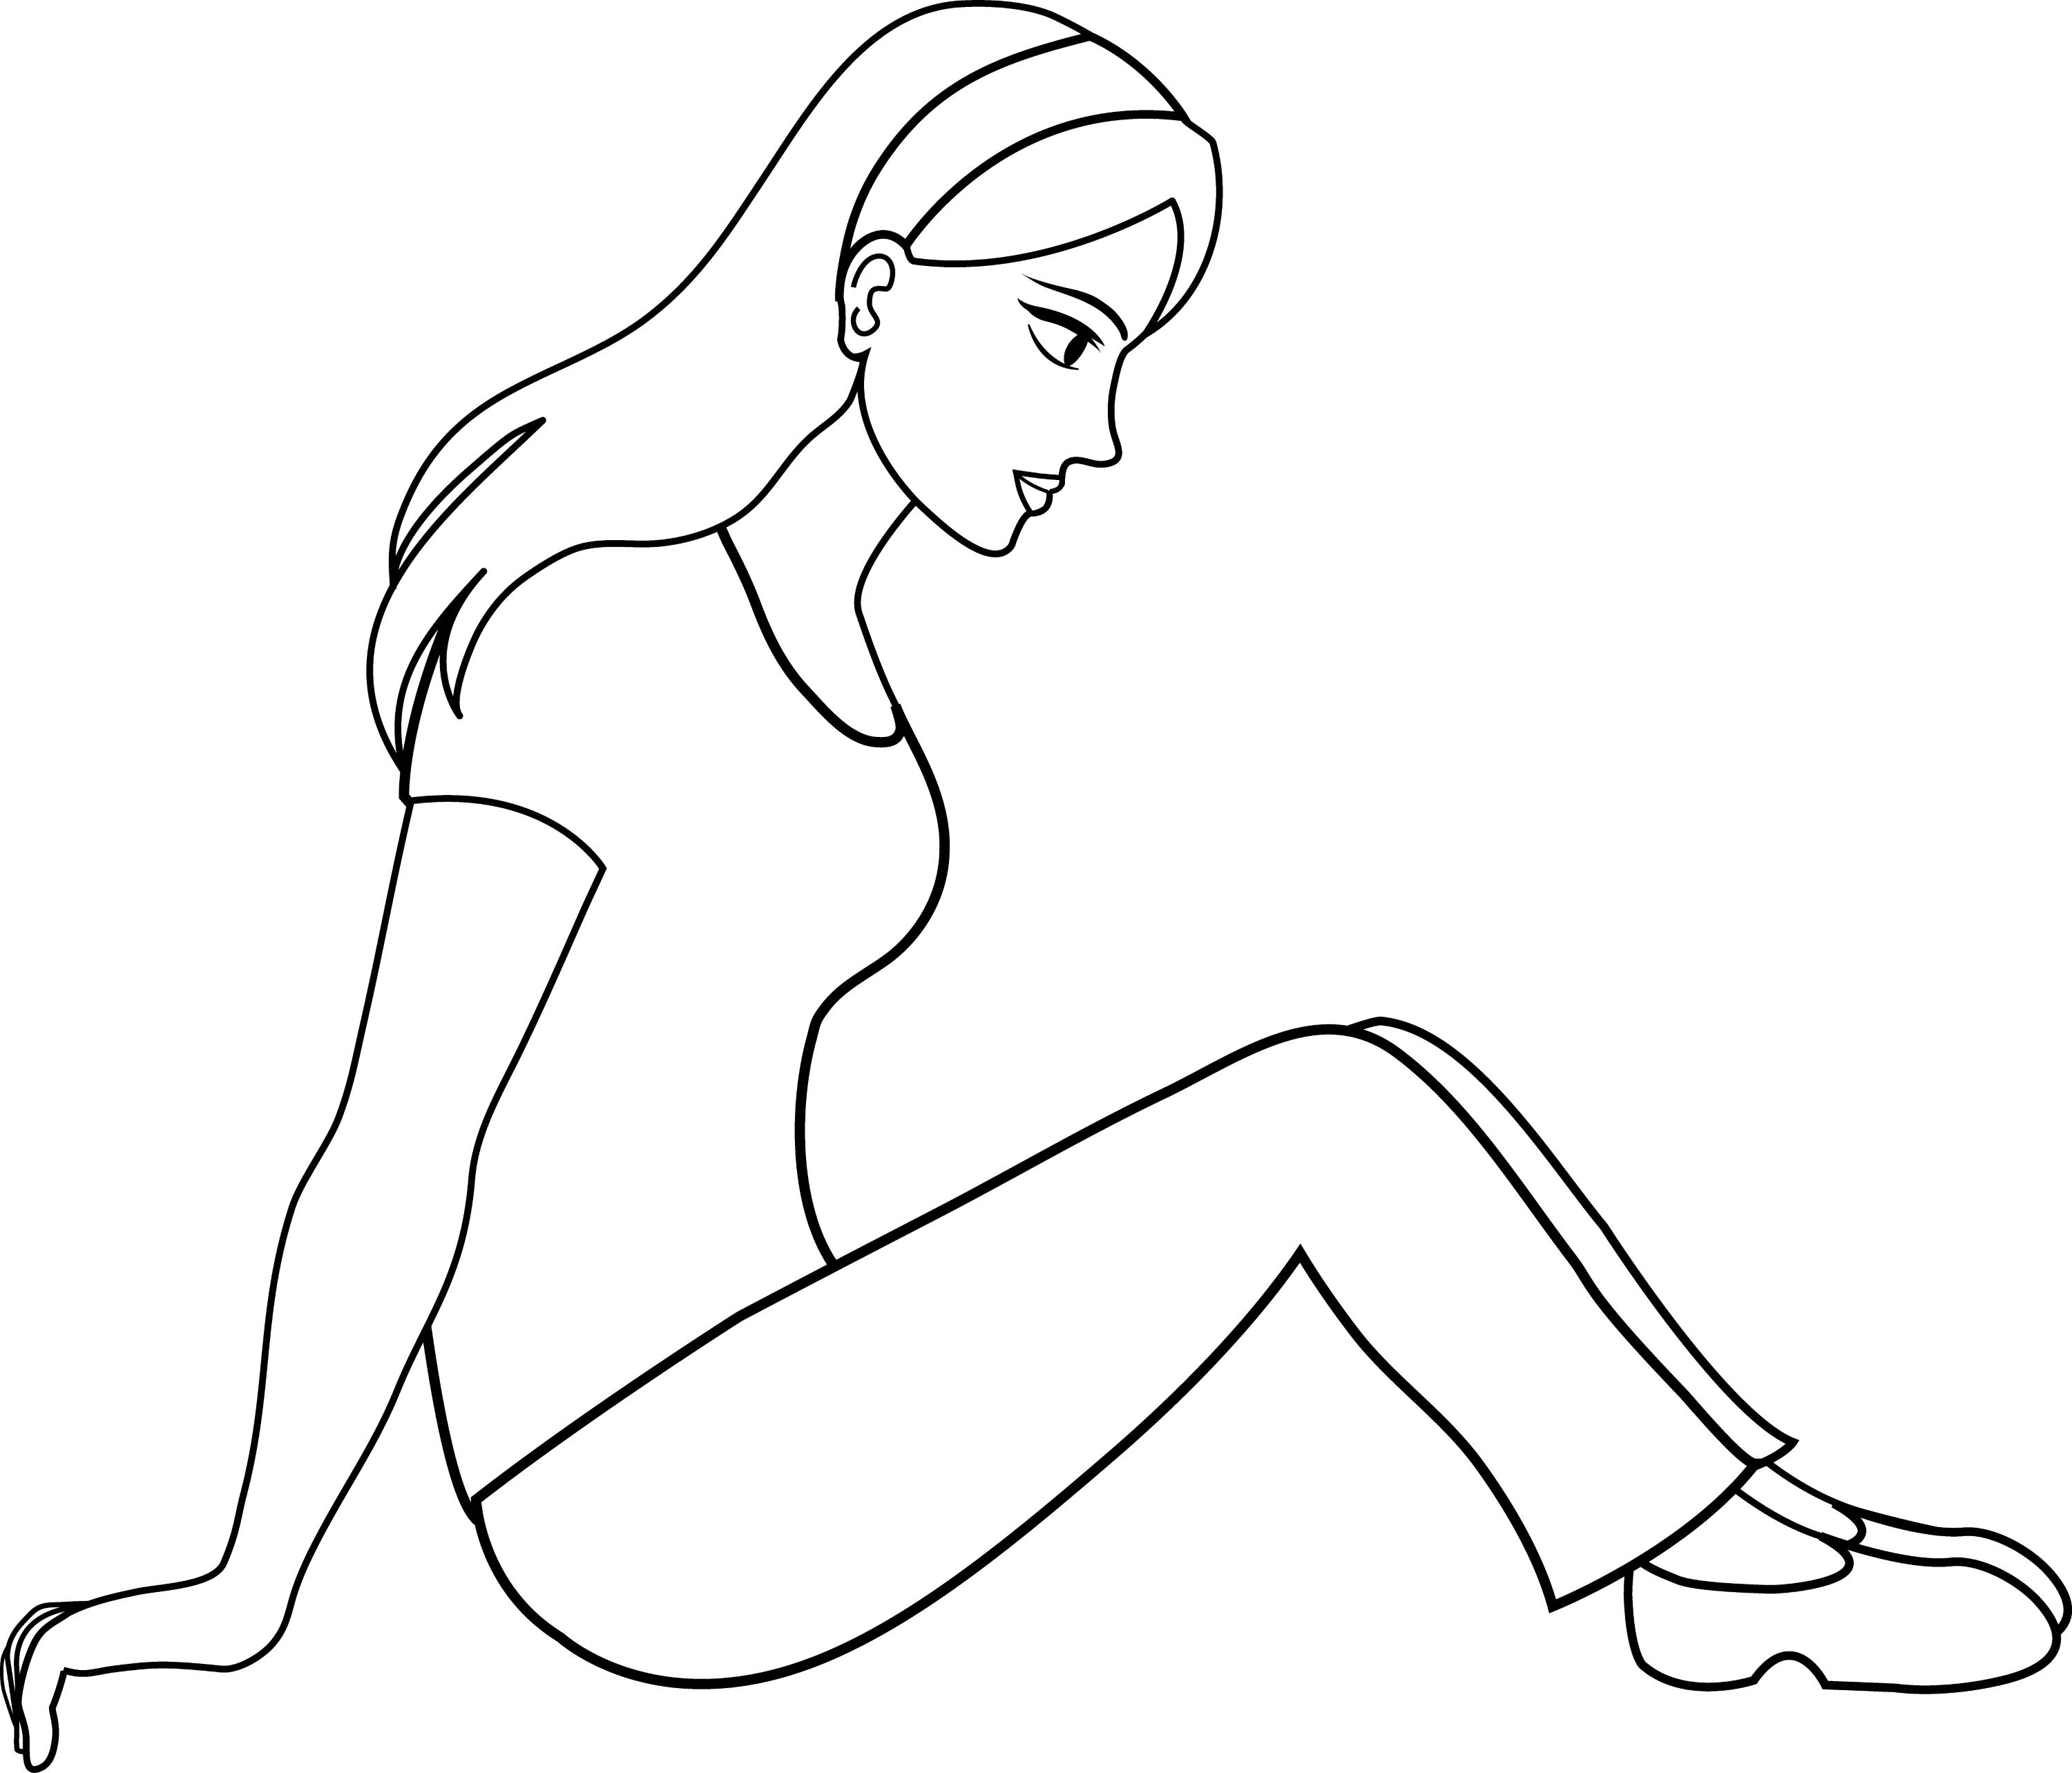 Colorable Line Art of Sitting Woman - Free Clip Art